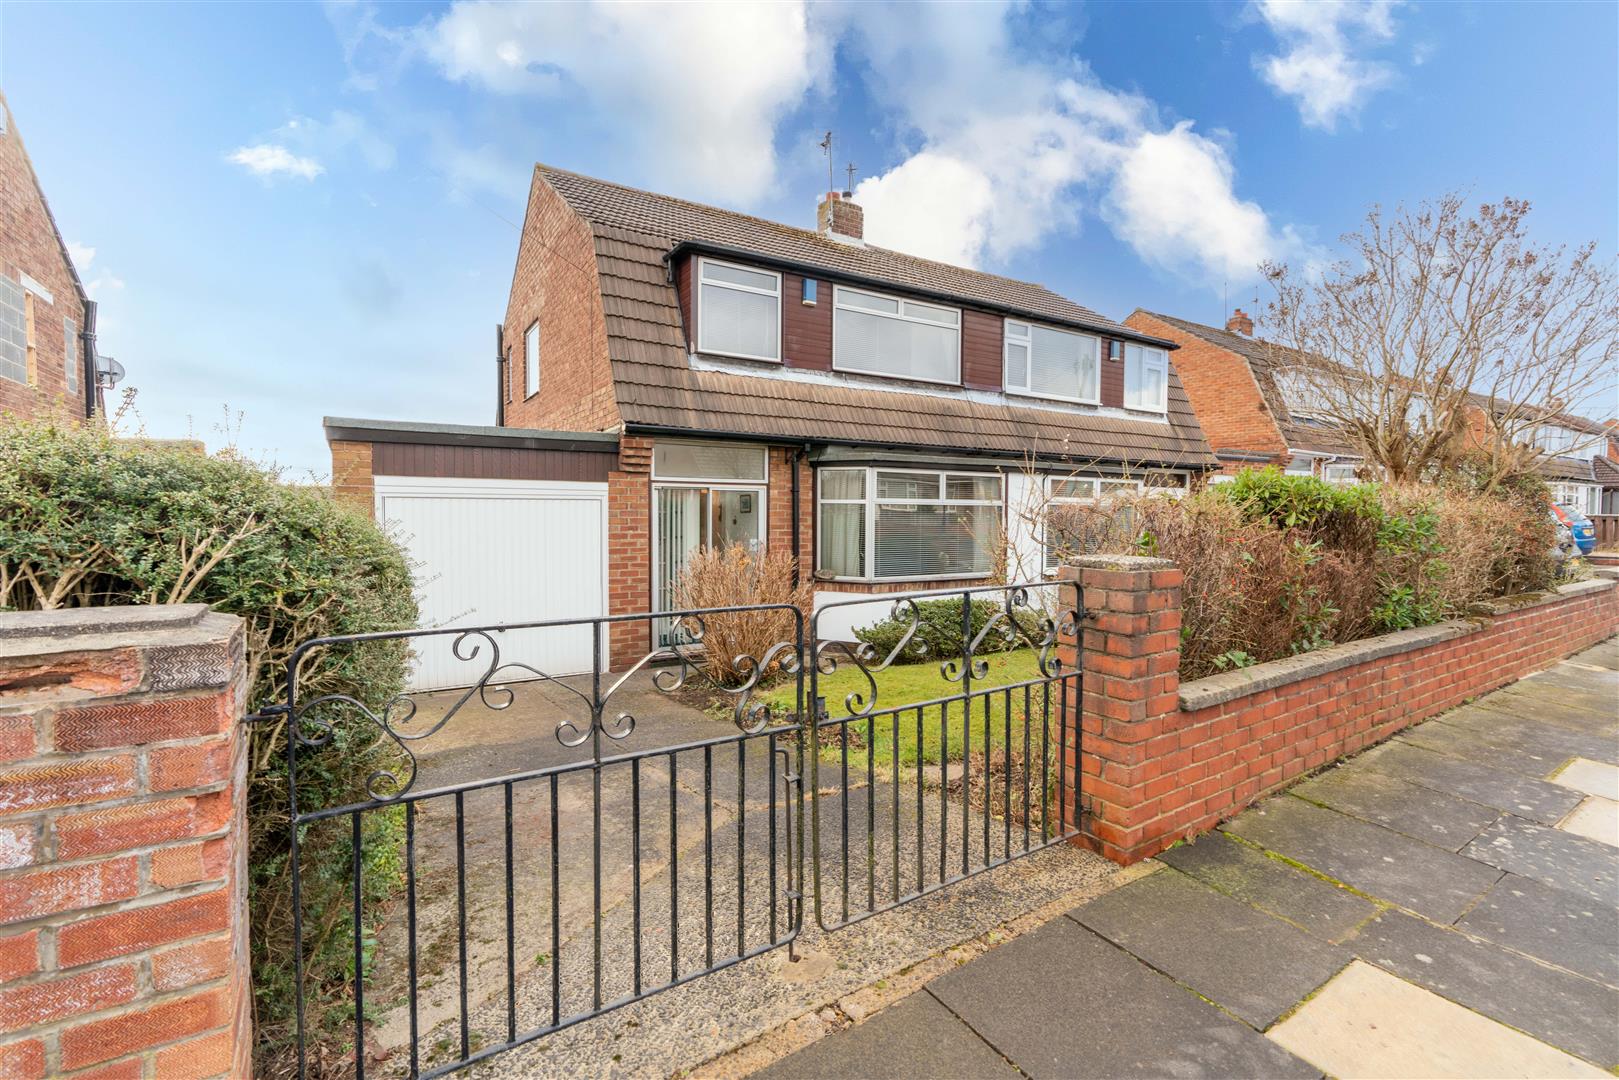 3 bed semi-detached house for sale in Caldwell Road, Red House Farm, NE3 